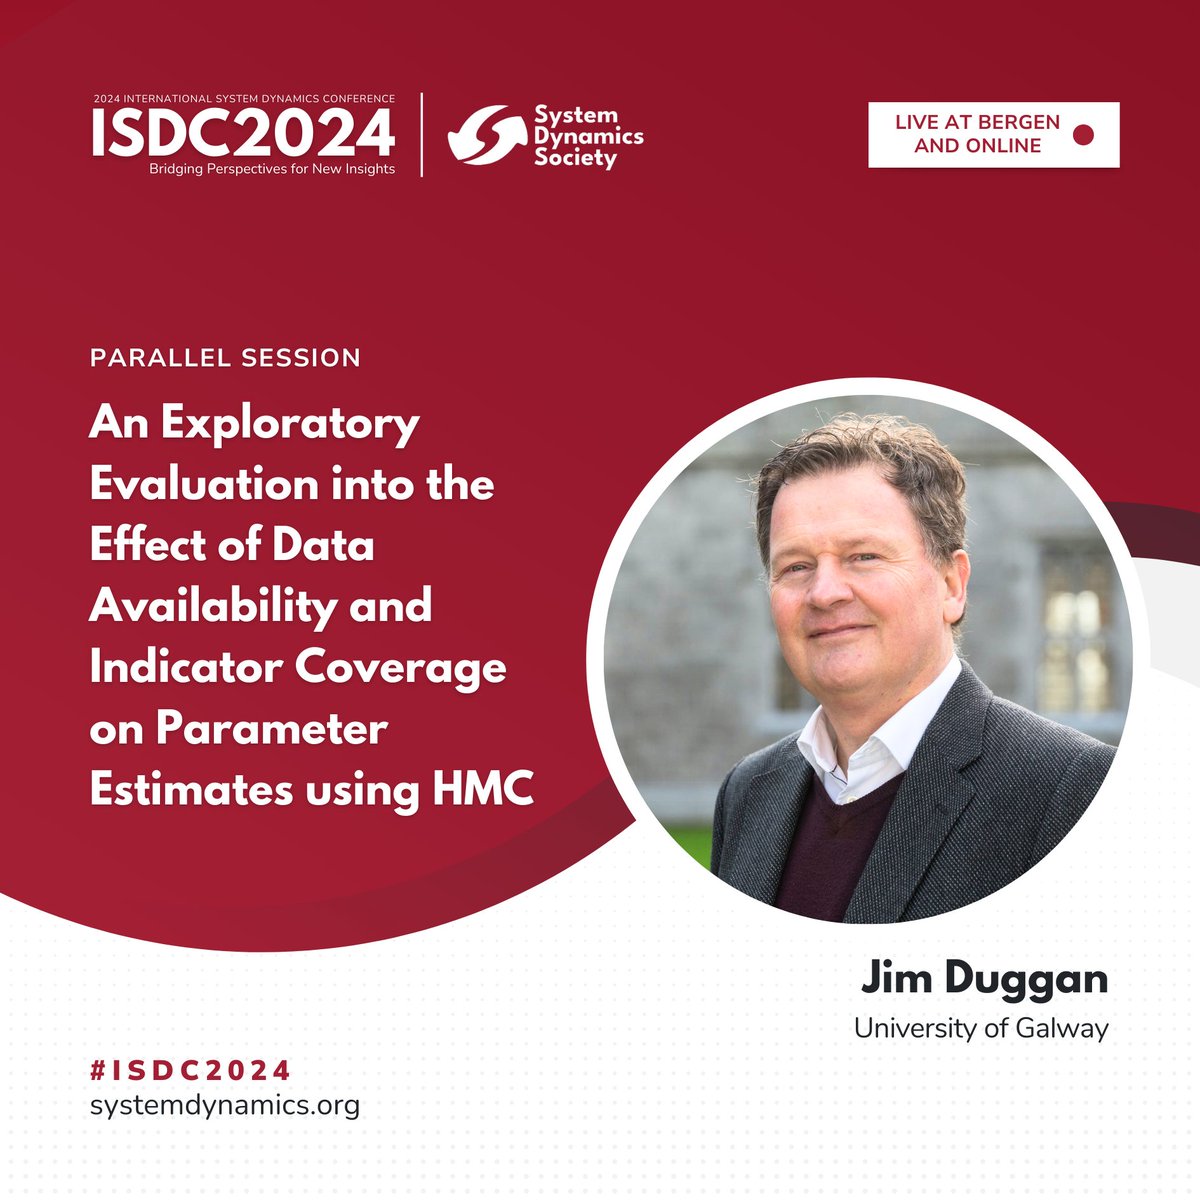 Looking forward to presenting my latest work at the biggest conference on System Dynamics and systems thinking, online or in Bergen on August 4-8, 2024. systemdynamics.org/conference #ISDC2024 #systemdynamics @systemdynamics_